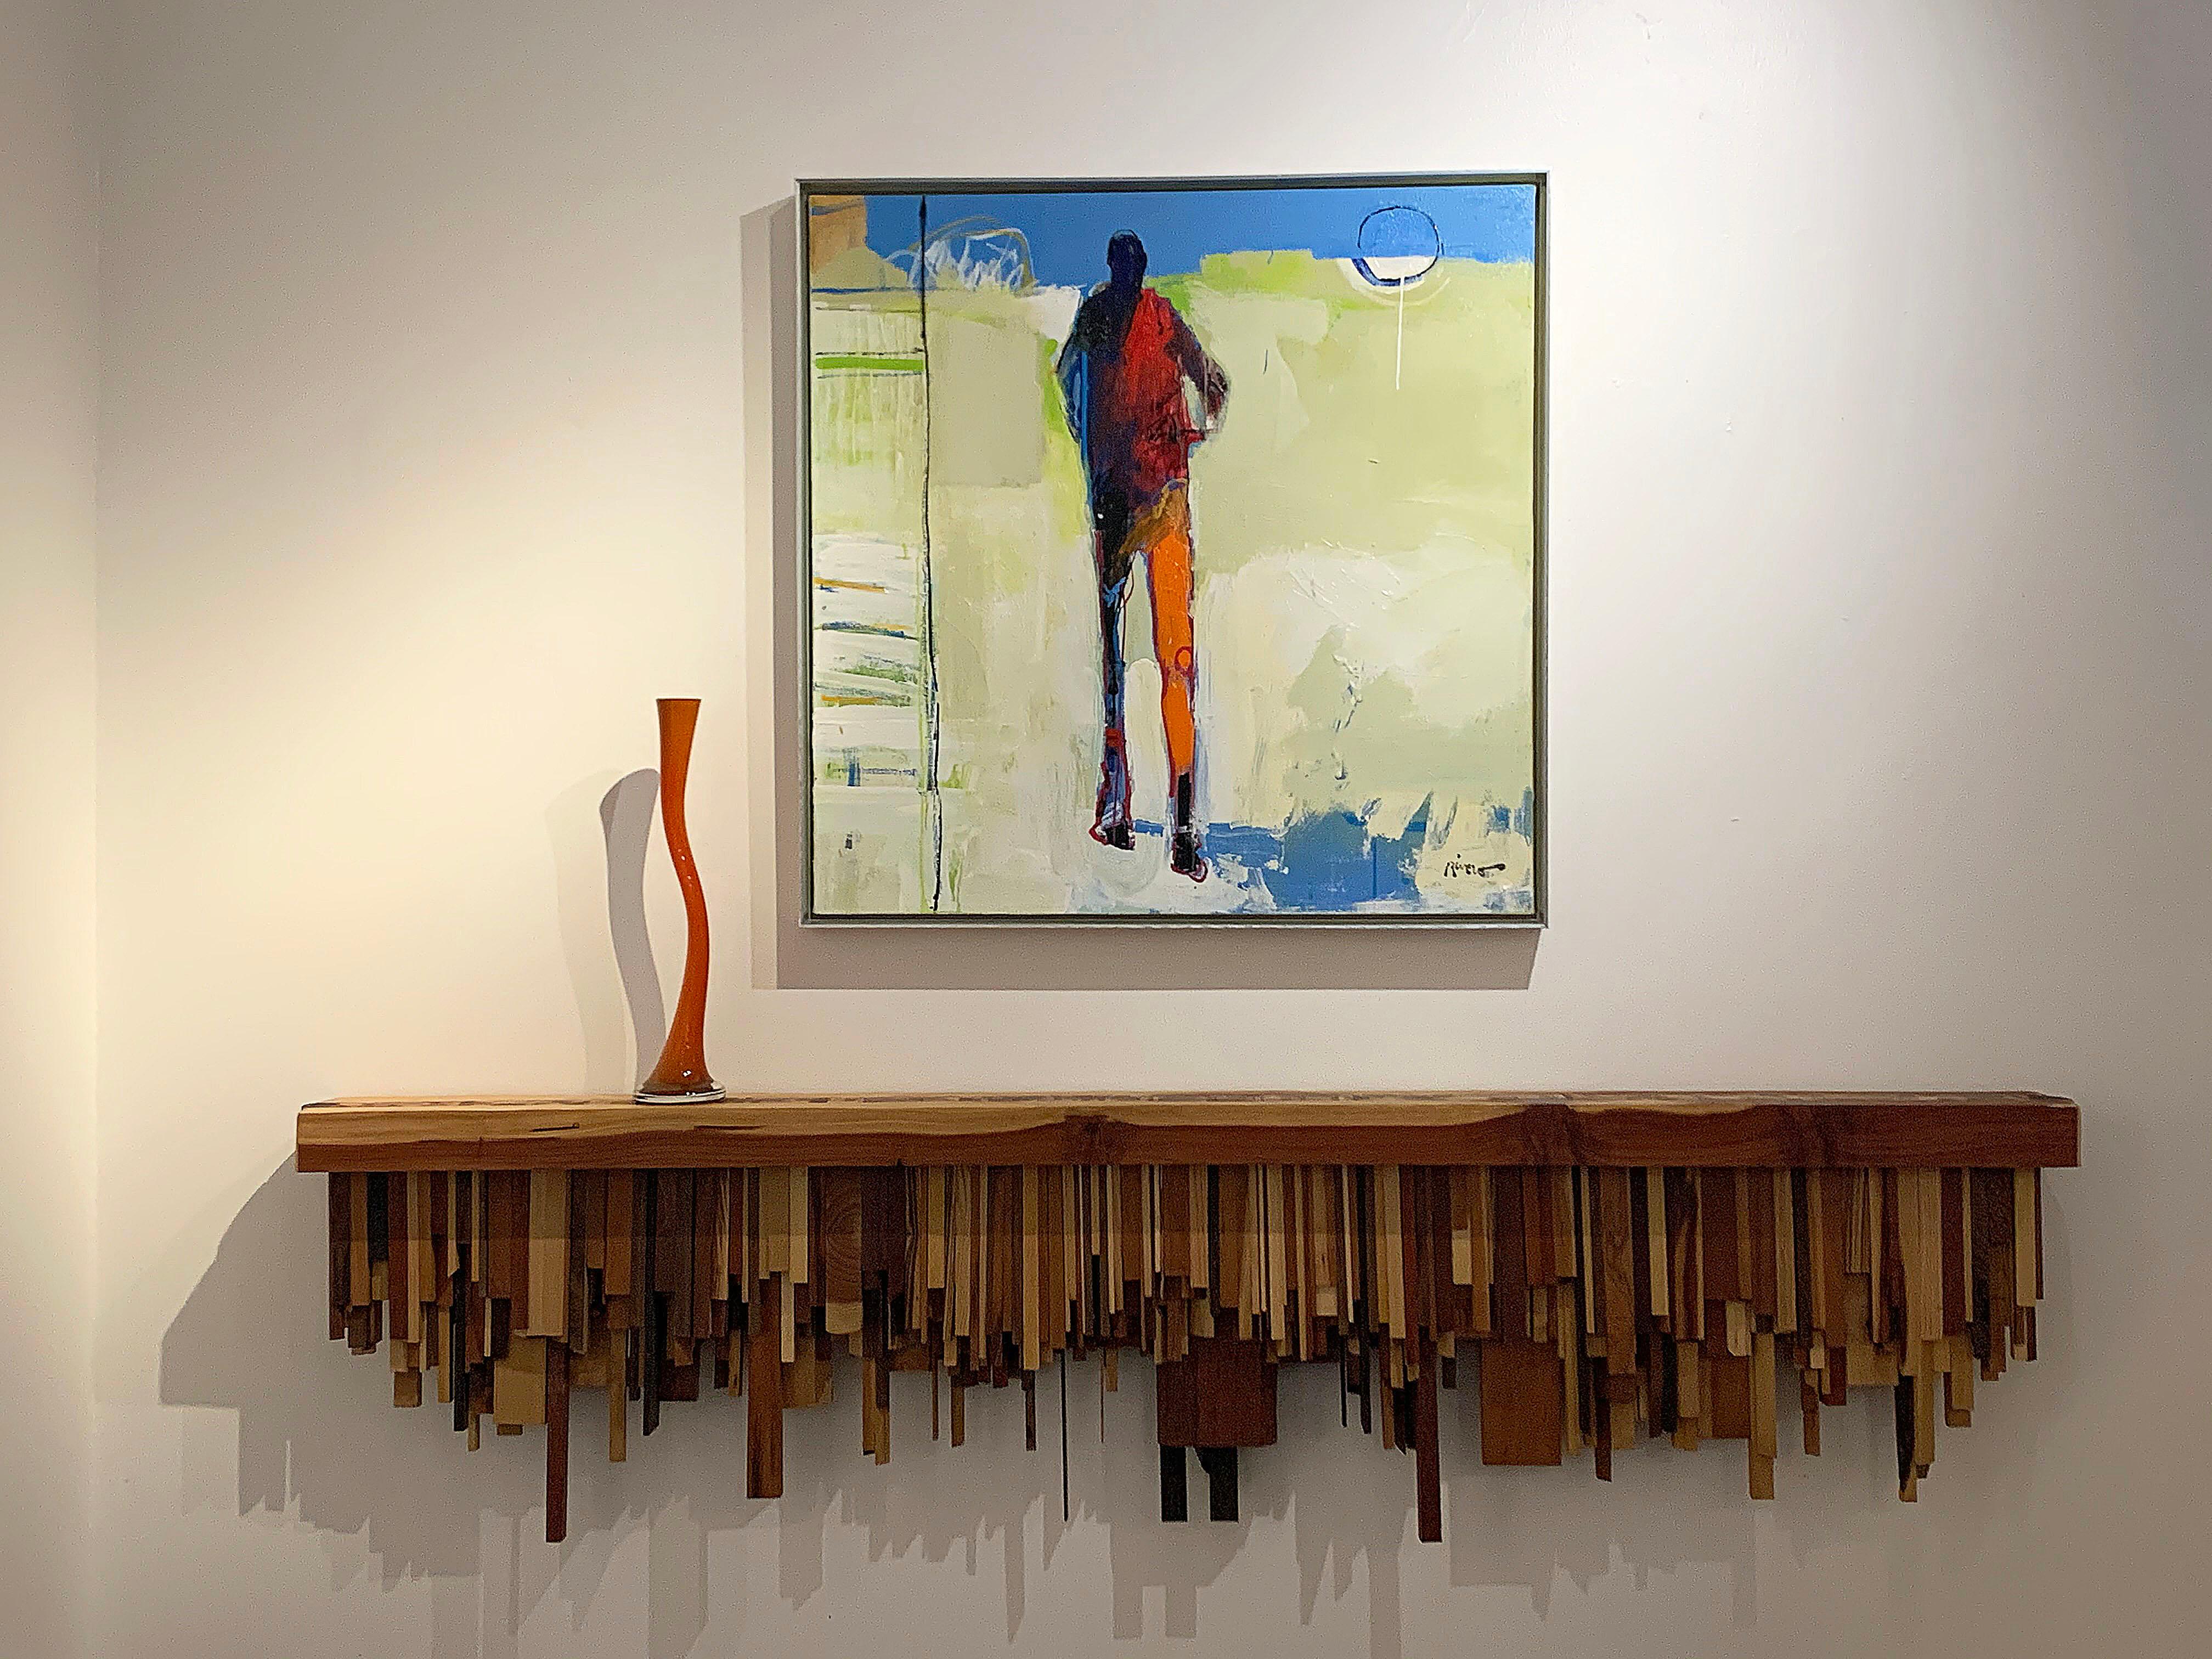 Mixed-media Long Mixed Wood Cityscape Shelf or Mantel by Artist Ben Darby, 2019 6